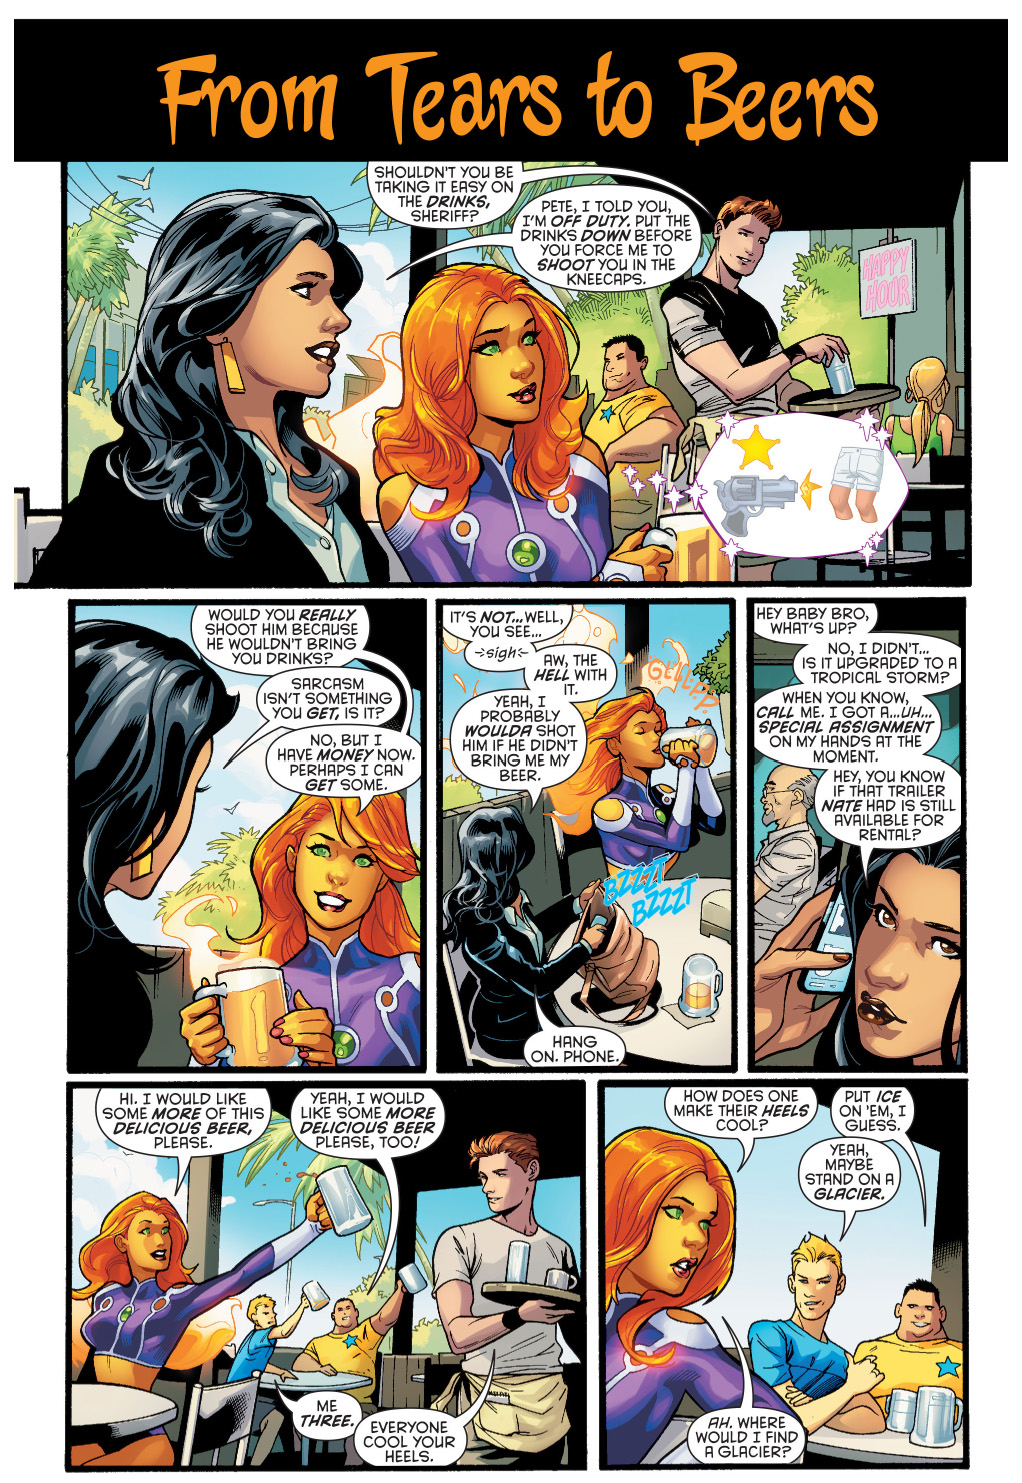 starfire has her first beer